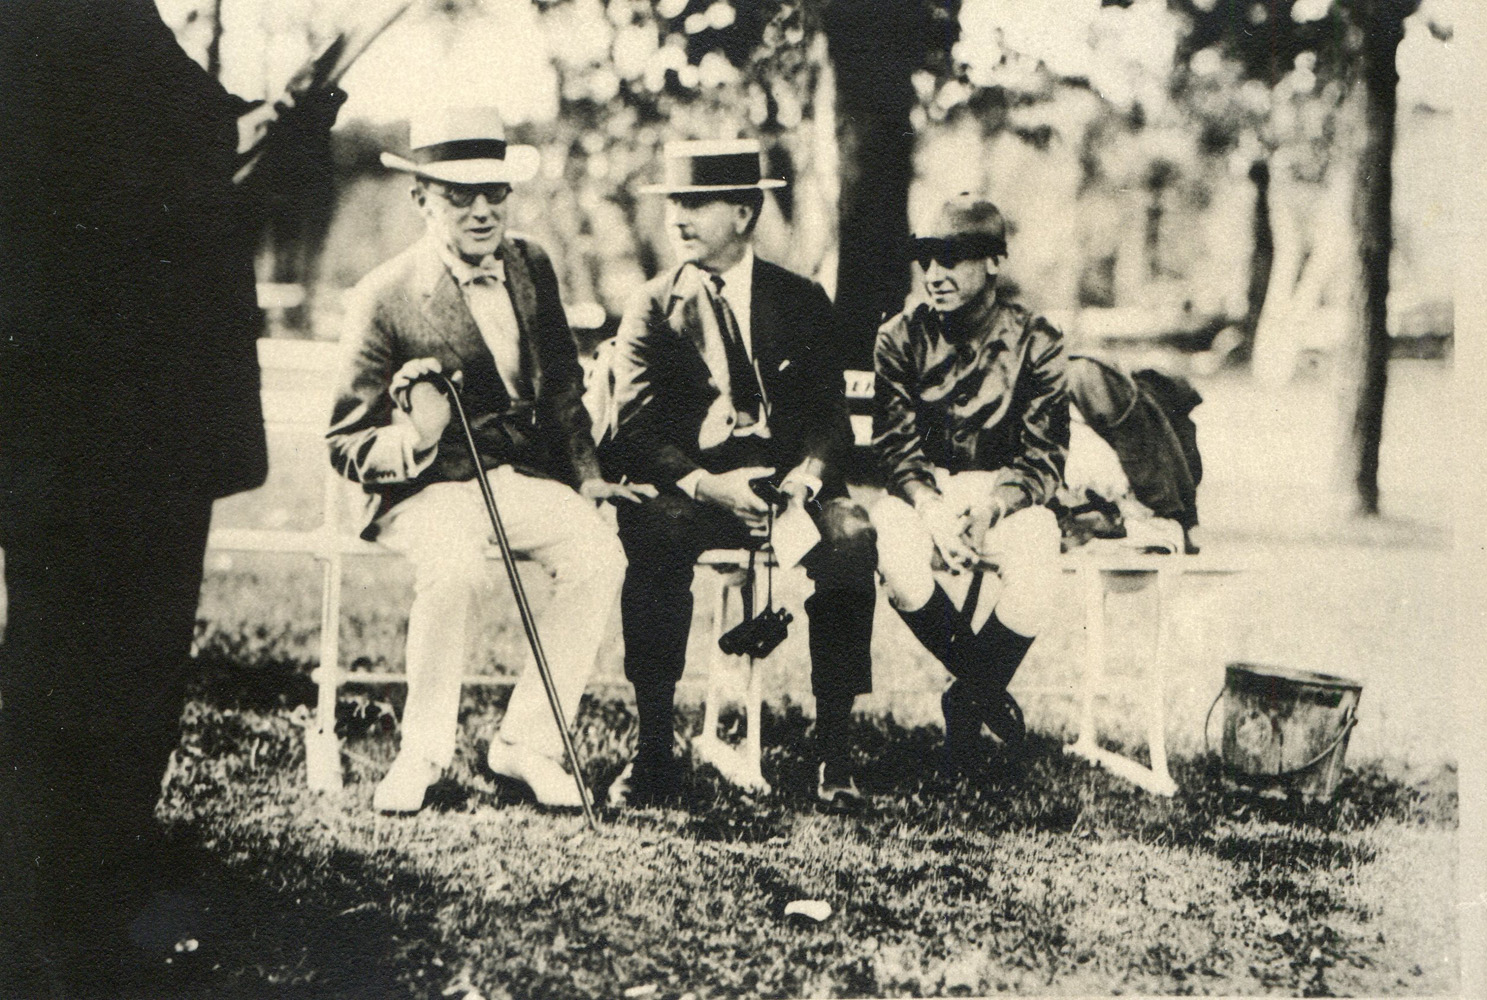 Trainer Tom Healey (center) and jockey Mack Garner share a bench with another unidentified man at Saratoga in 1920 (Museum Collection)